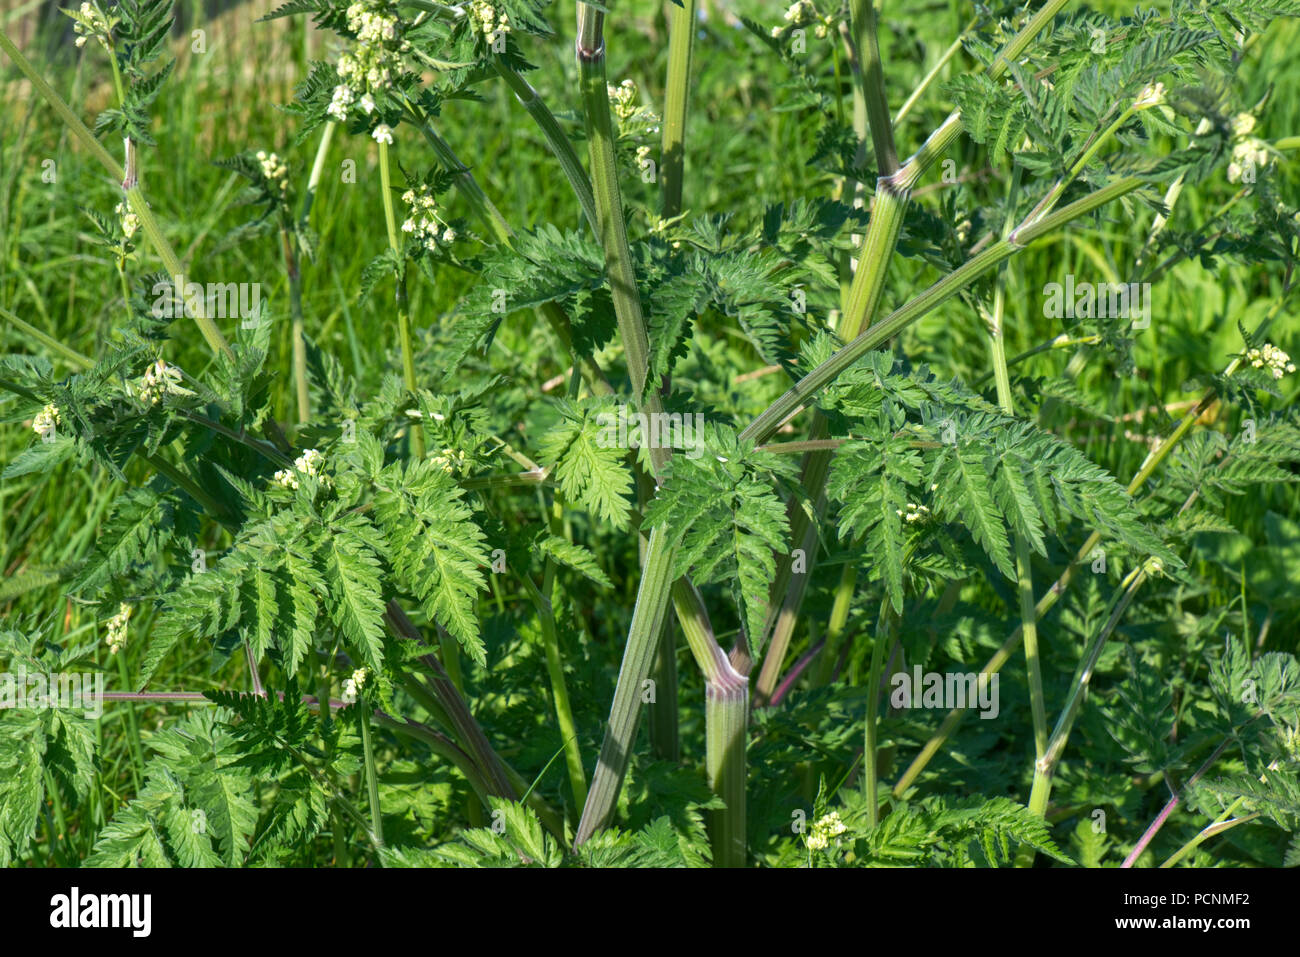 Cow parsley, Anthriscus sylvestris, foliage, green, fern-like, leaves on roadside verge, Berkshire, May Stock Photo